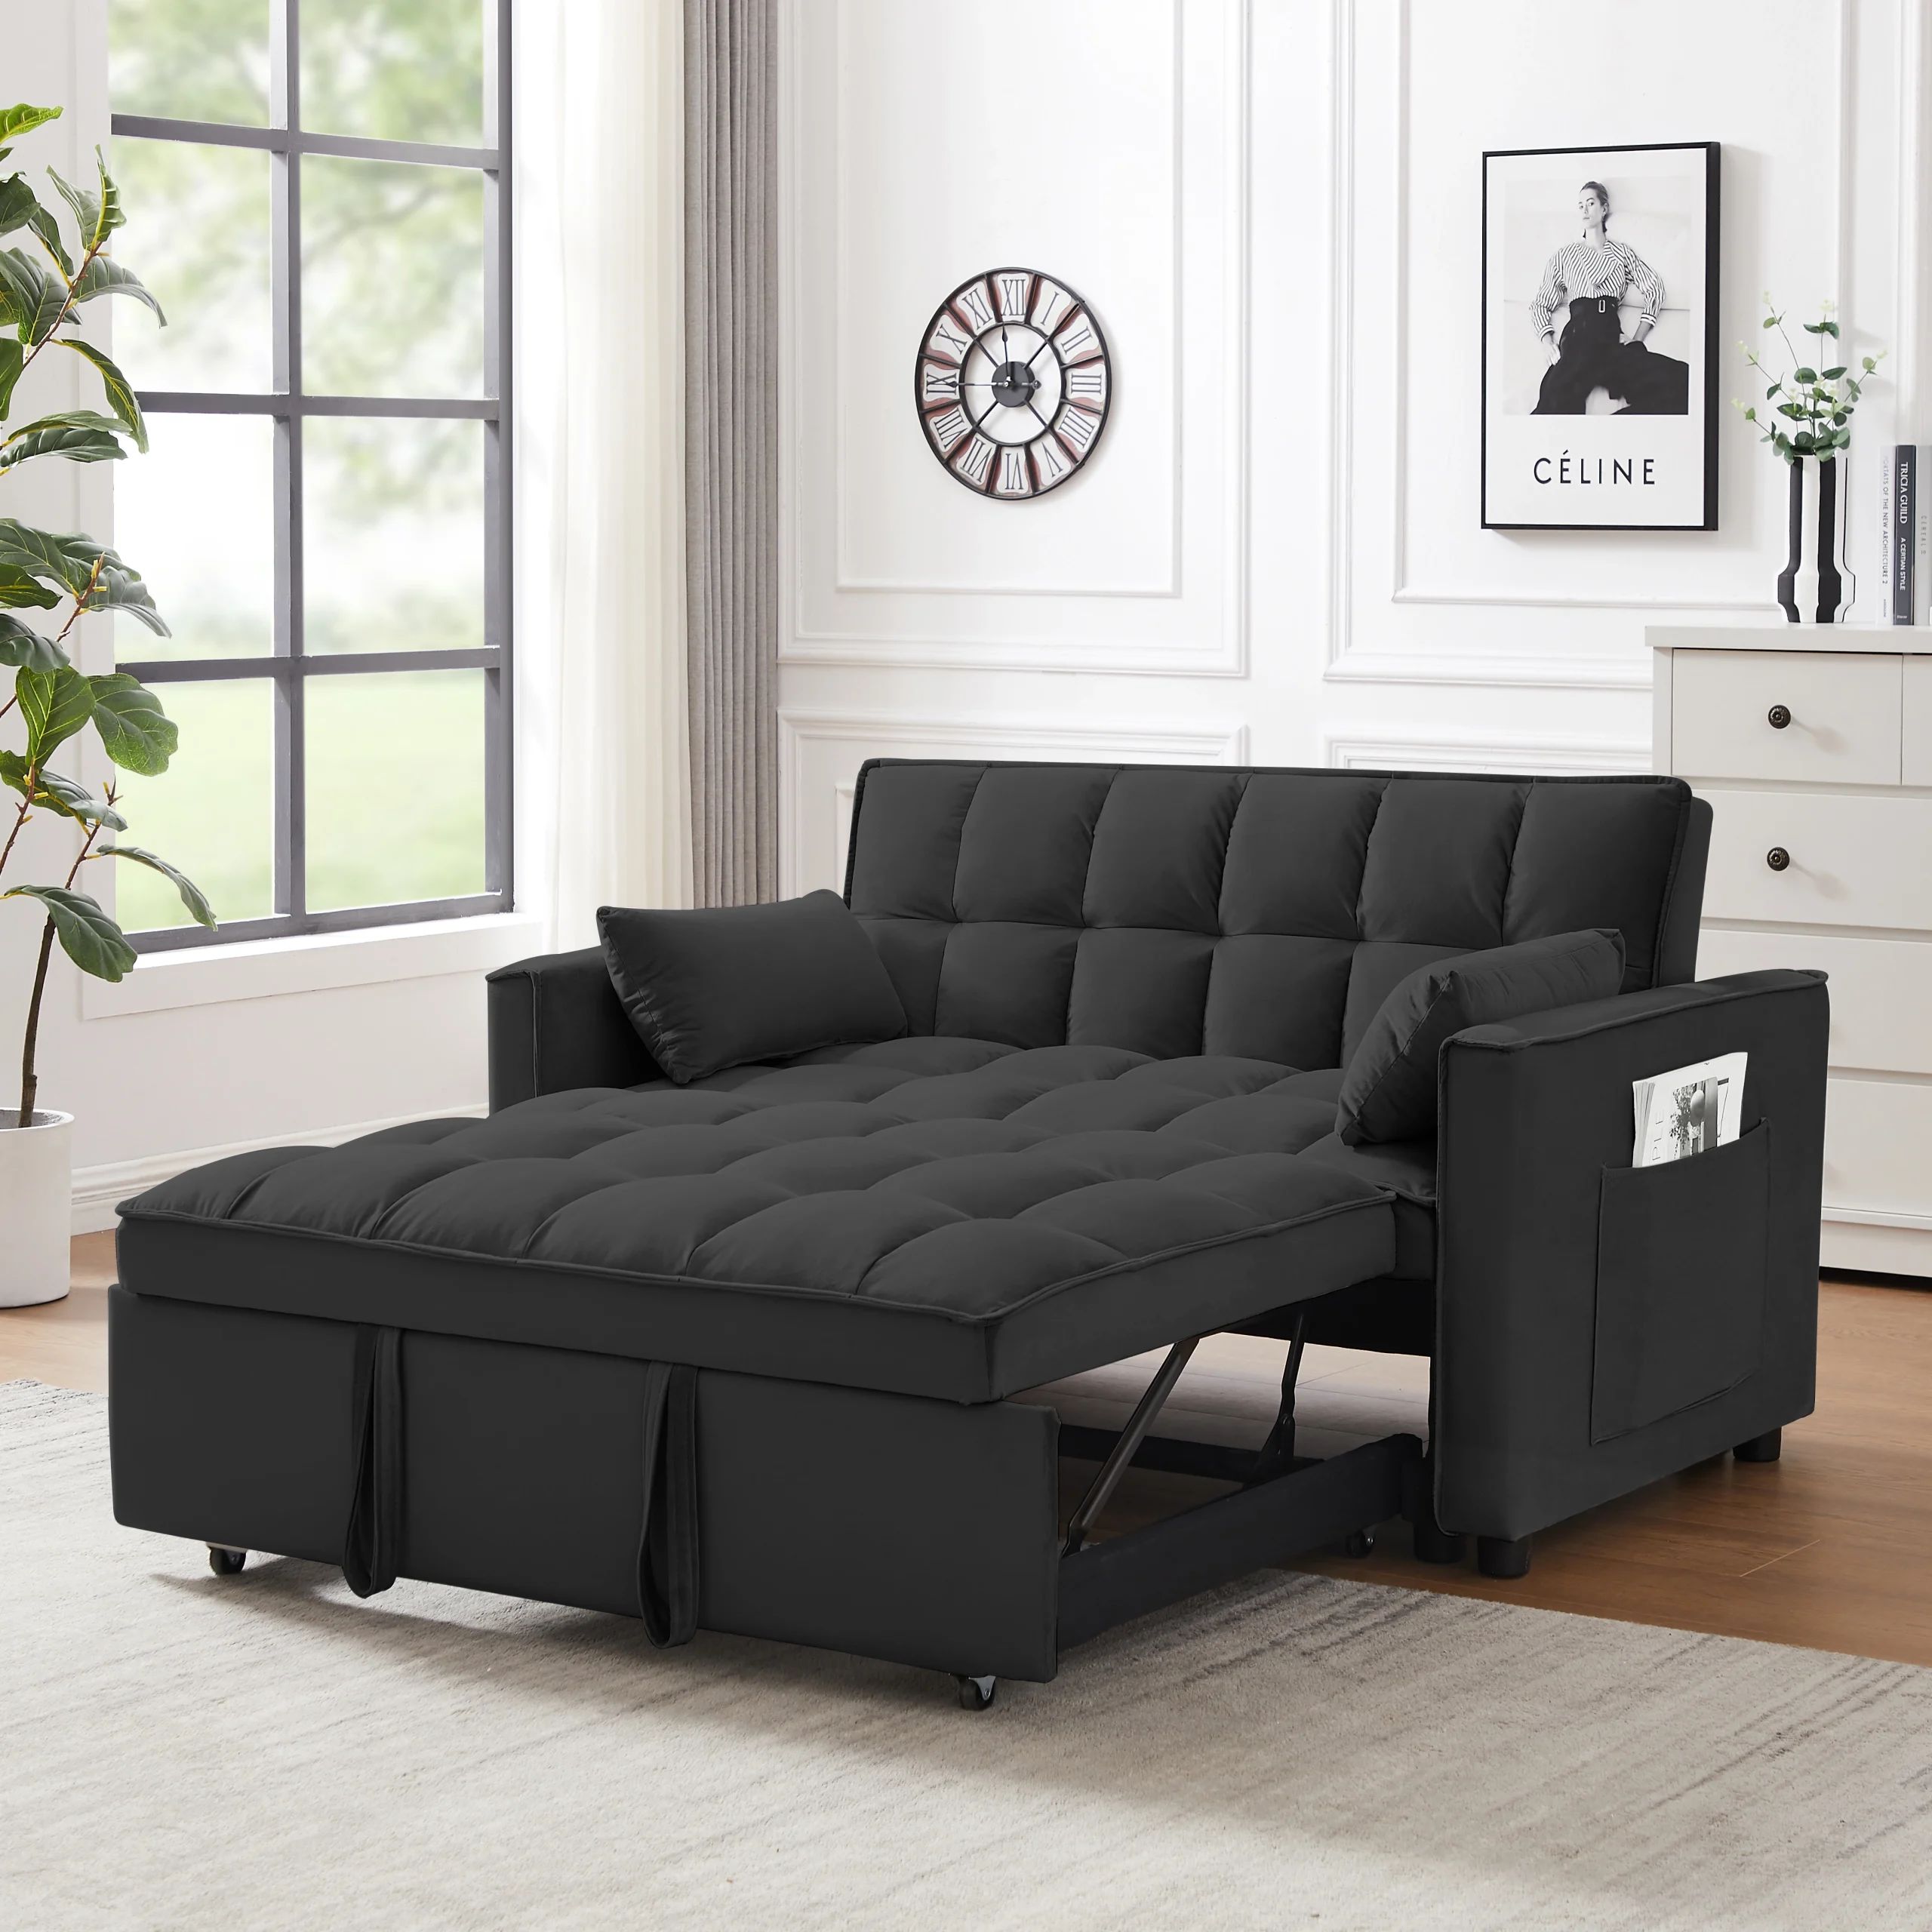 Dropship Modern Velvet Loveseat Futon Sofa Couch W/pullout Bed, Small Love  Seat Lounge Sofa W/reclining Backrest, Toss Pillows, Pockets, Furniture For  Living Room,3 In 1 Convertible Sleeper Sofa Bed, Black To Sell Within Small Love Seats In Velvet (View 13 of 15)